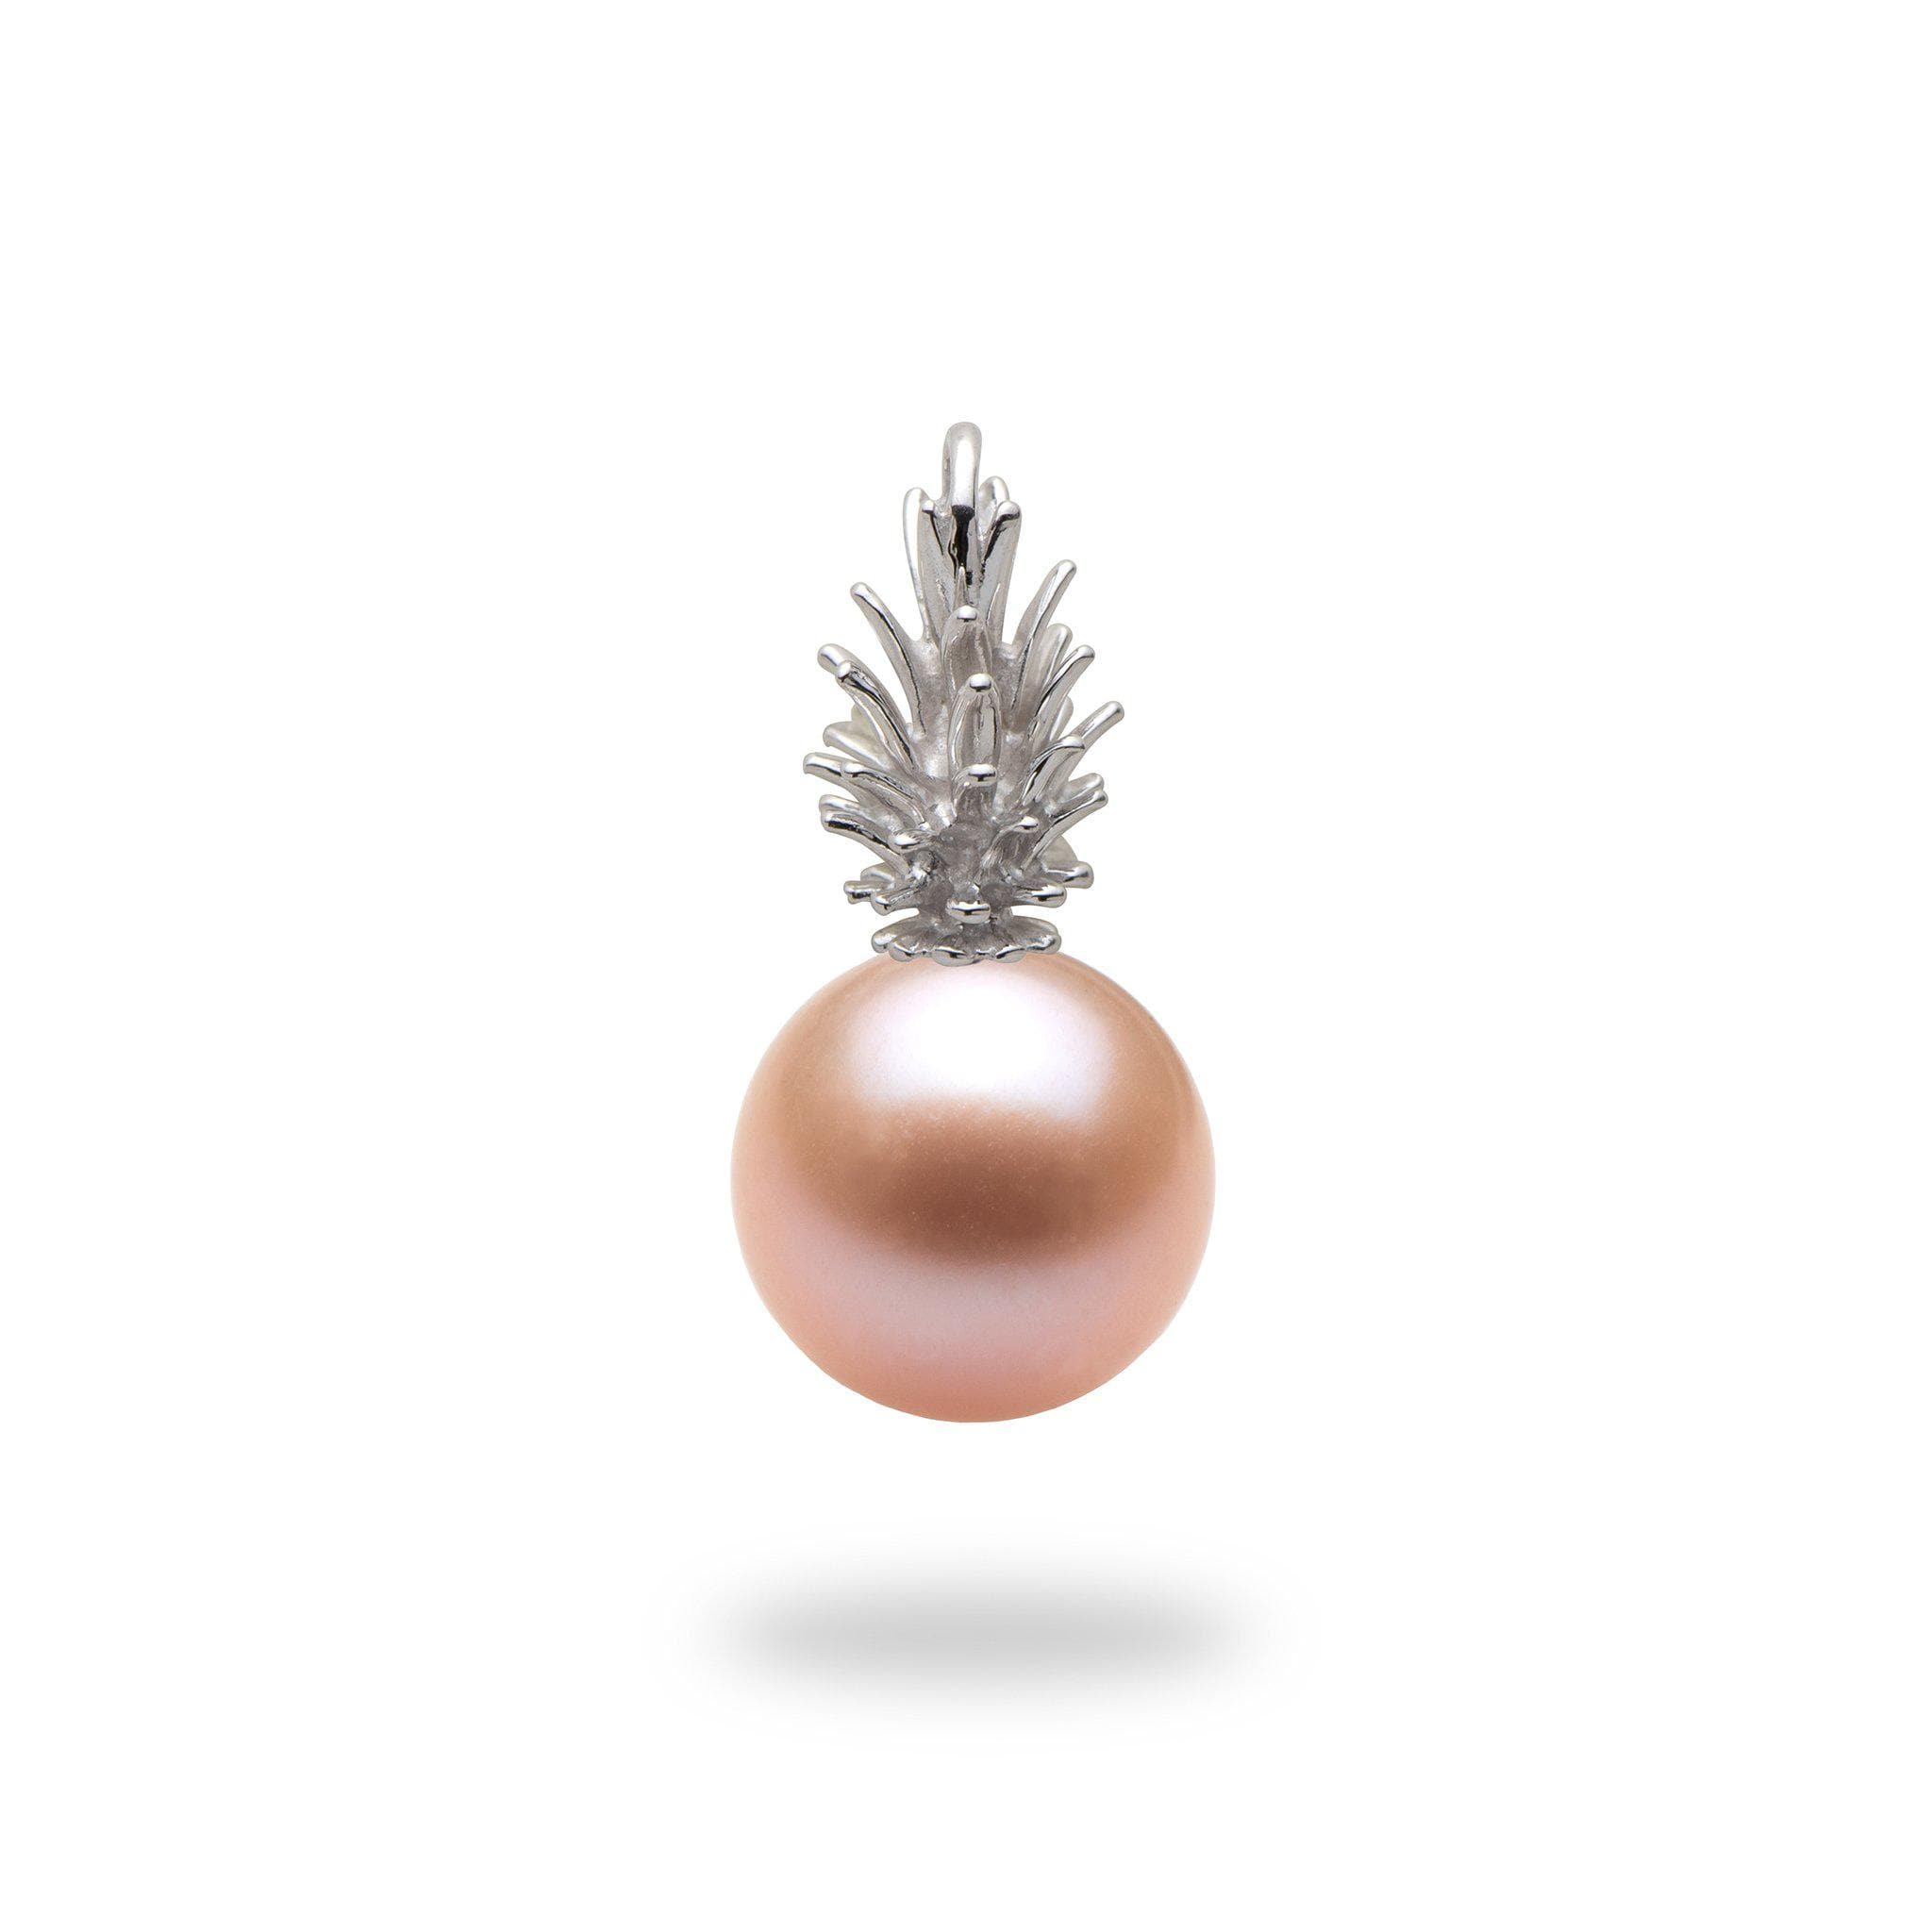 Pineapple Pendant Mounting in 14K White Gold with Pink Pearl - Maui Divers Jewelry